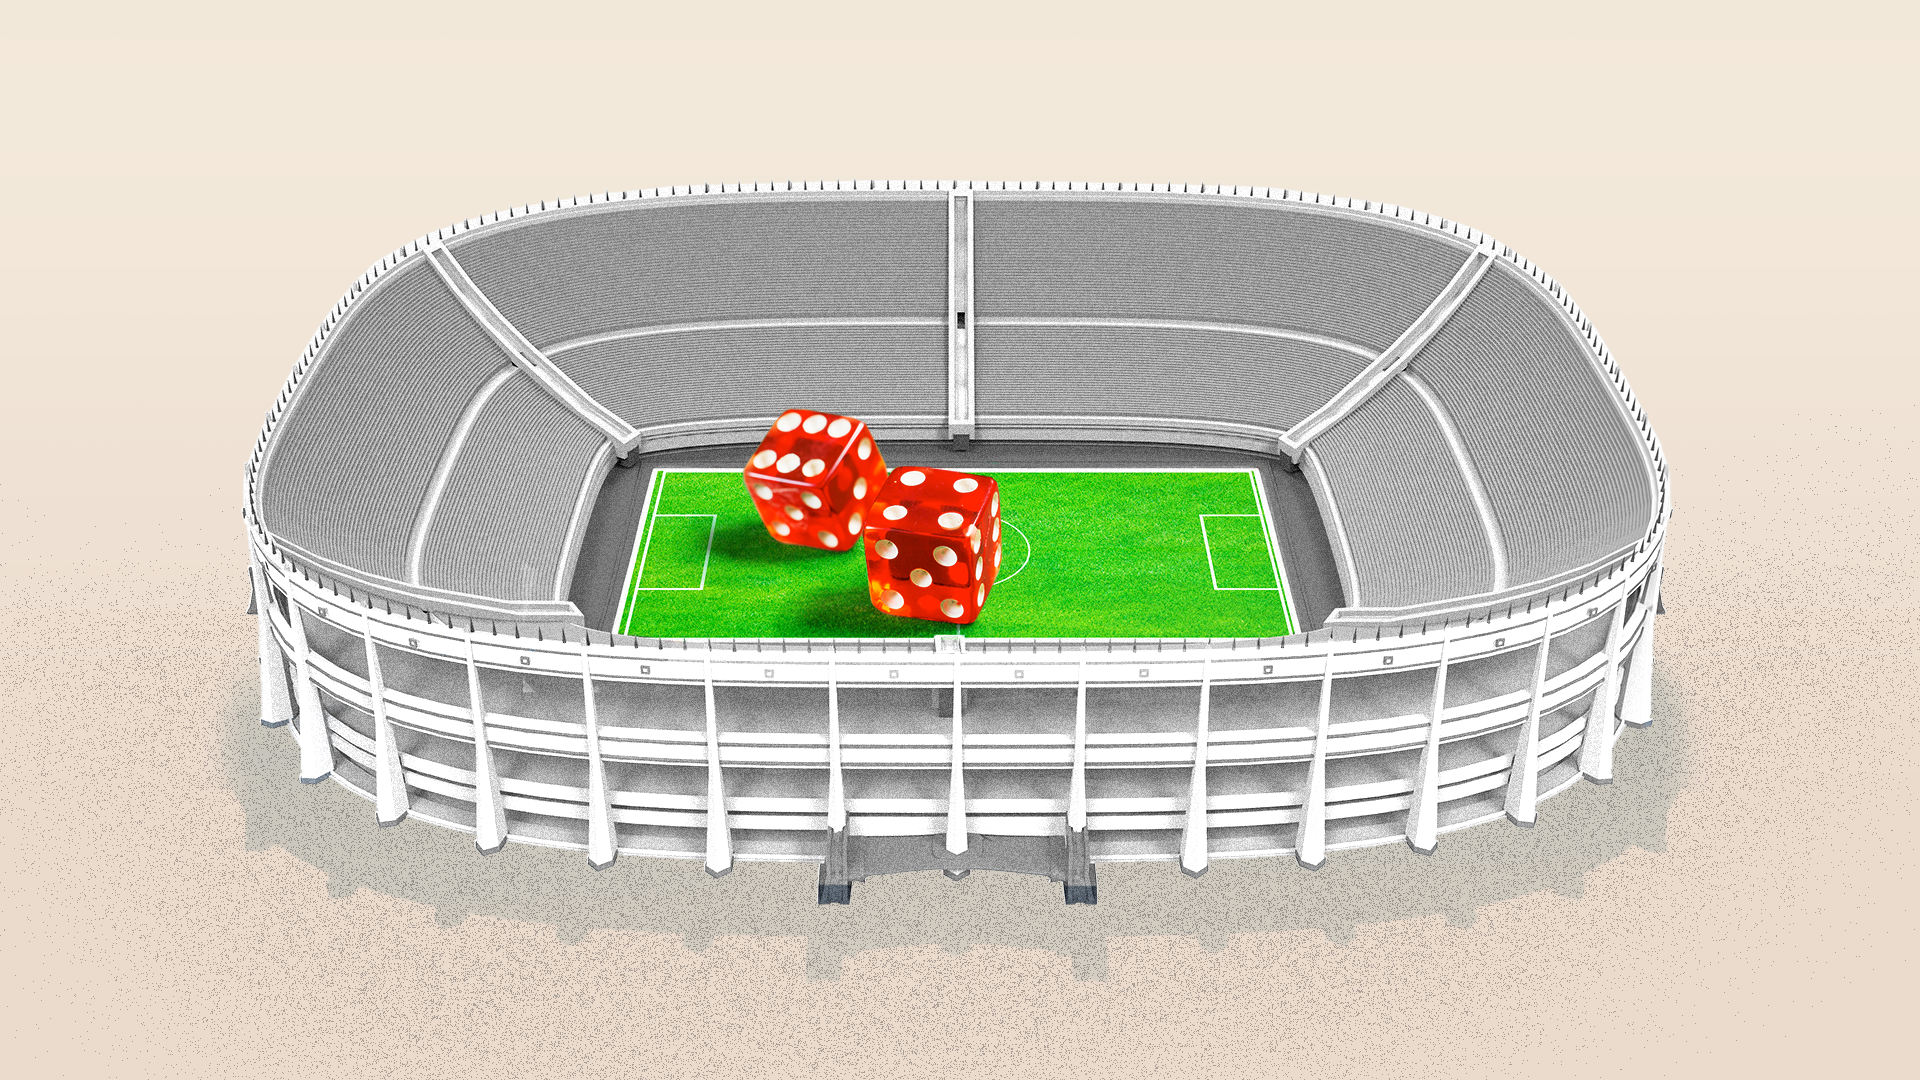 A stadium with dice in it